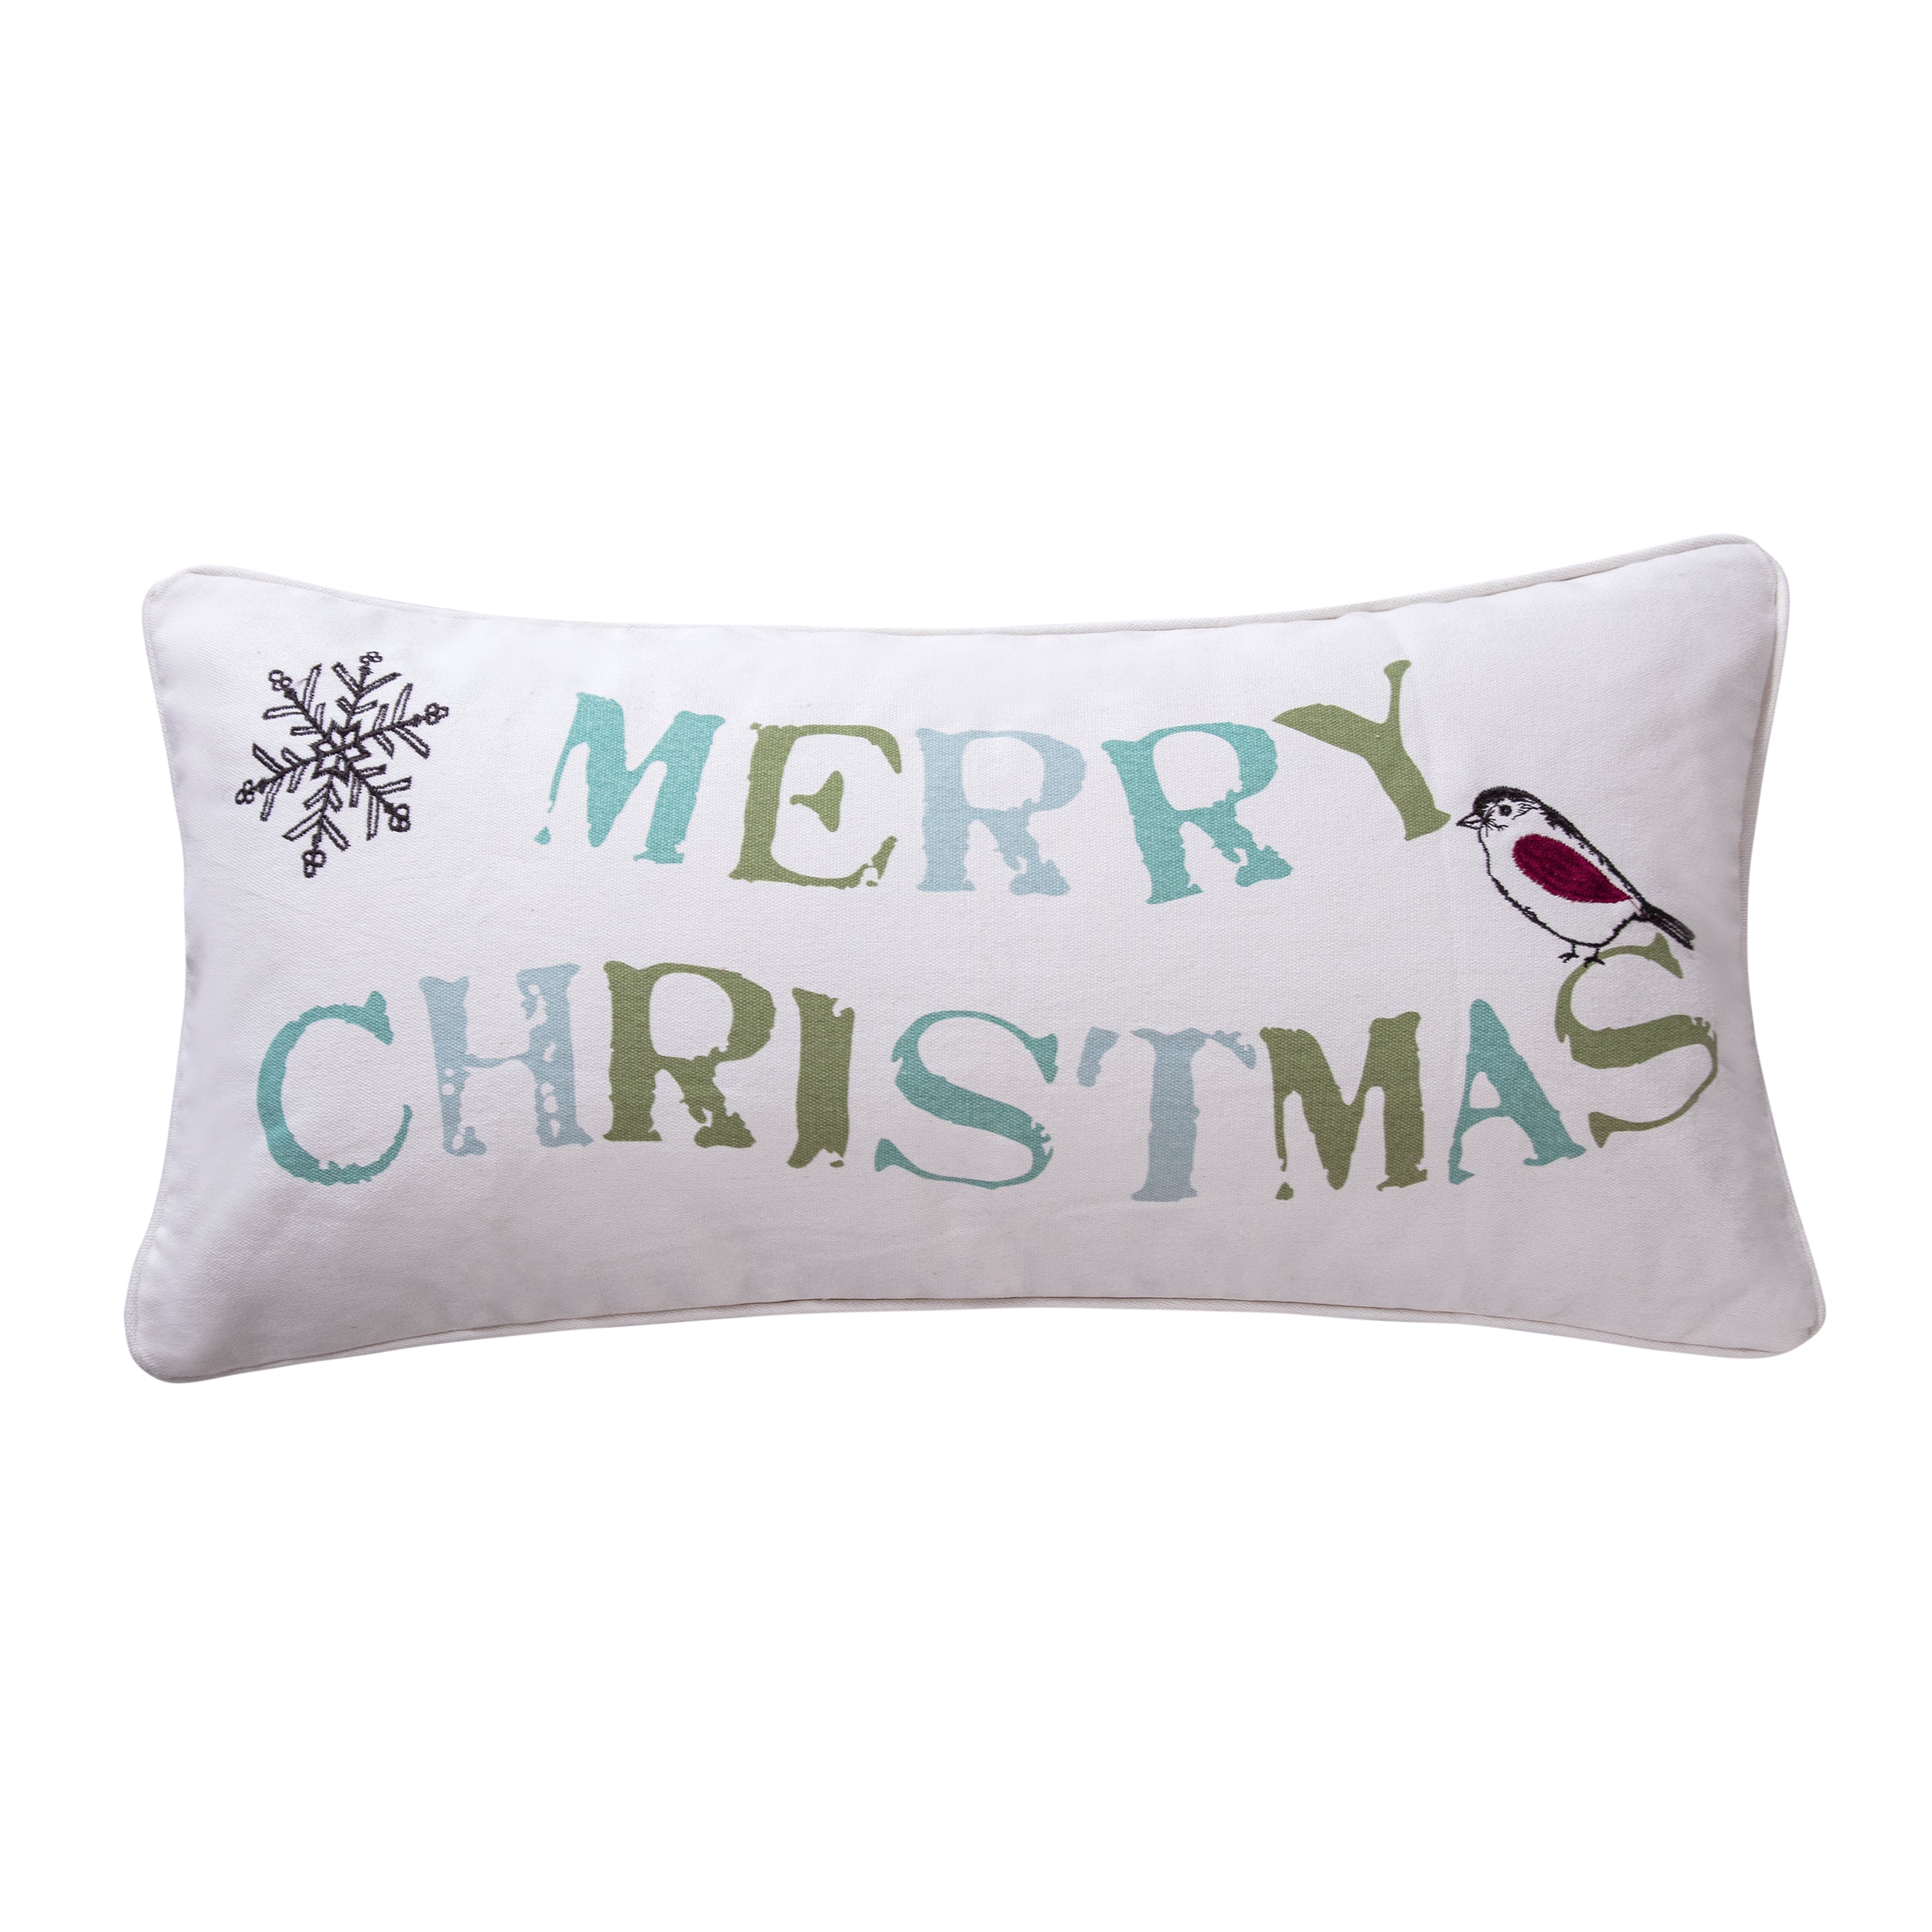 Holly Merry Christmas Pillow